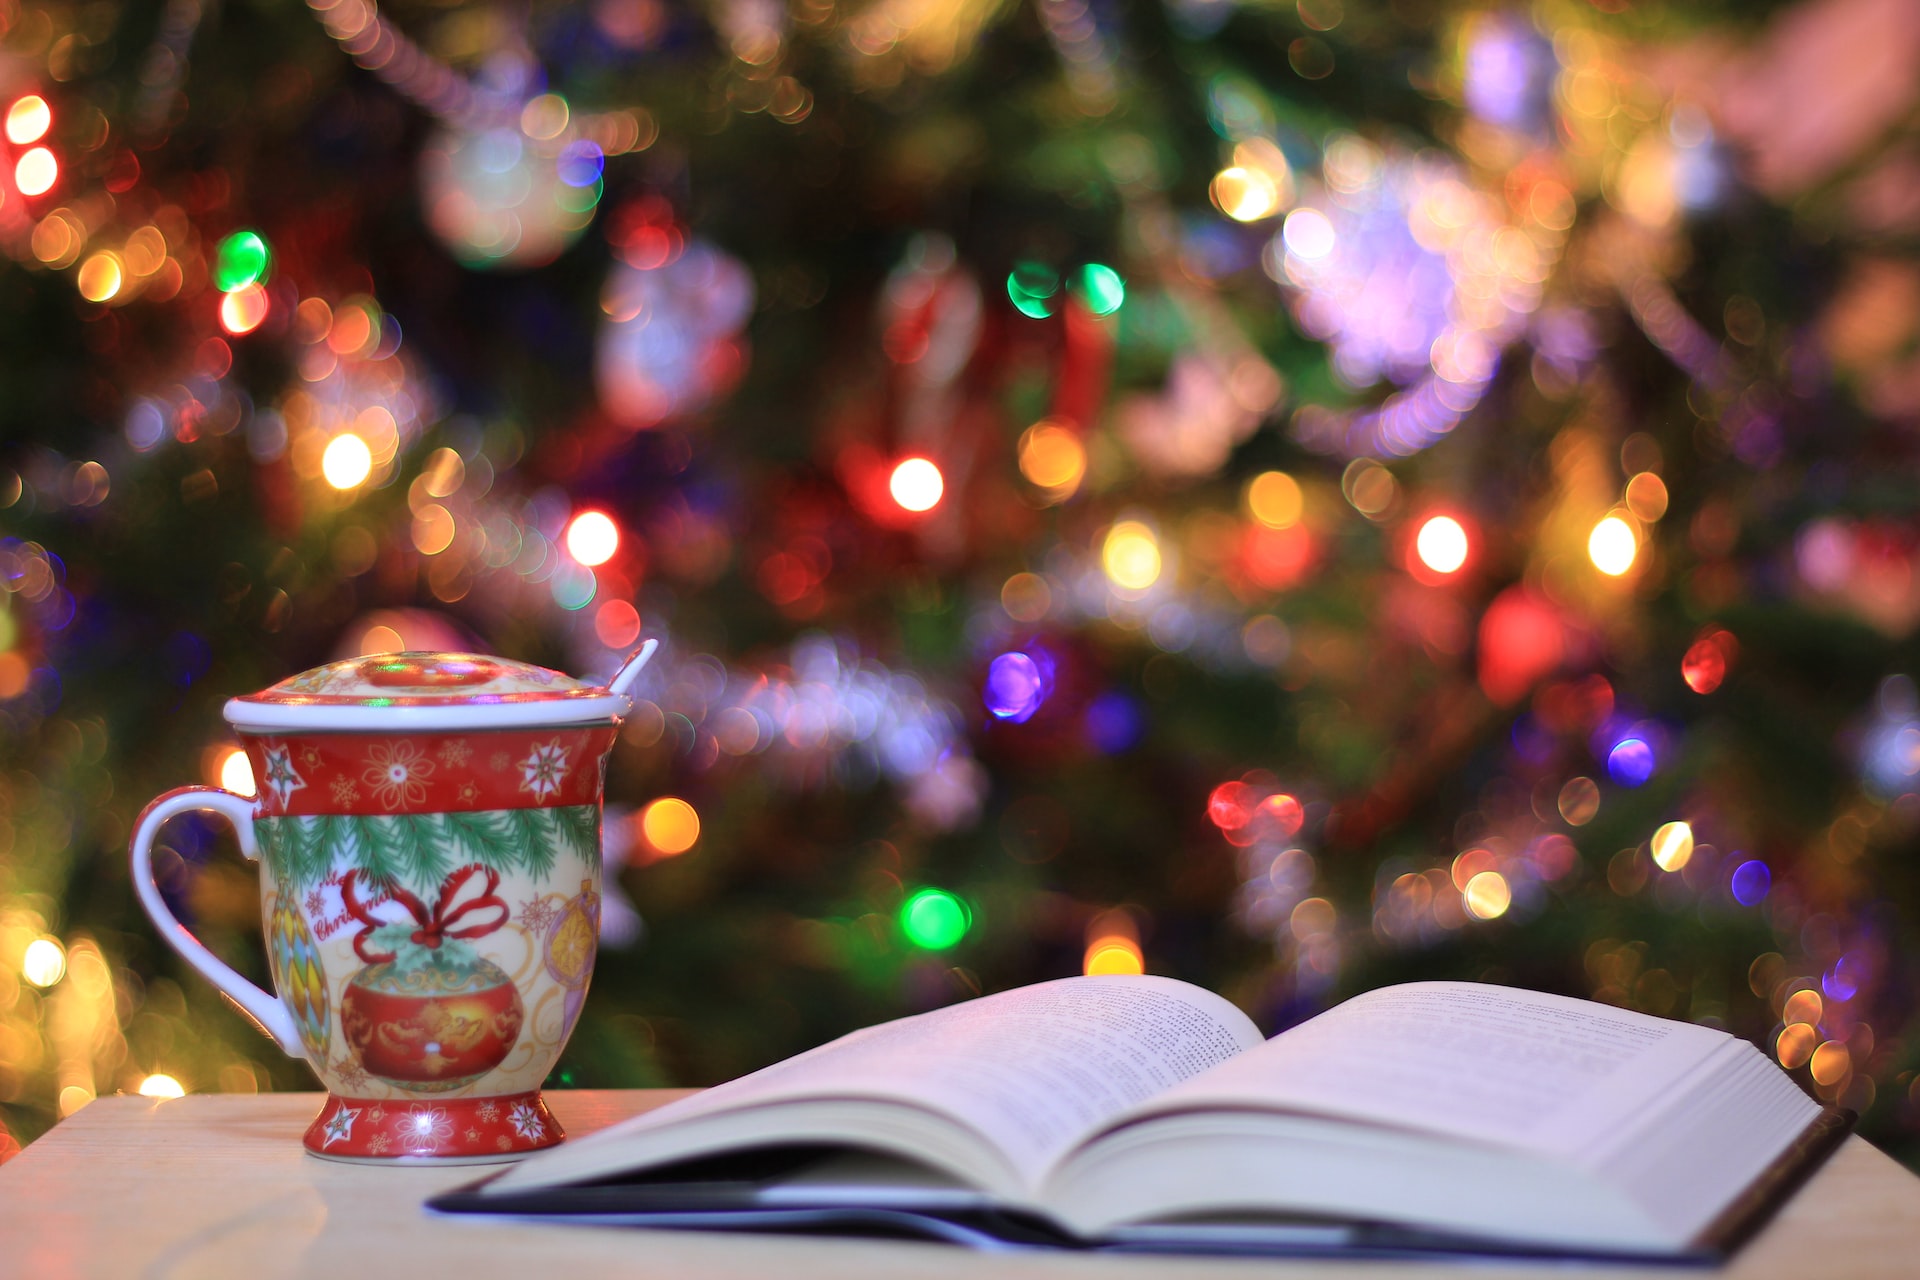 A book opened to a middle page with a coffee mug beside it in front of a Christmas tree.